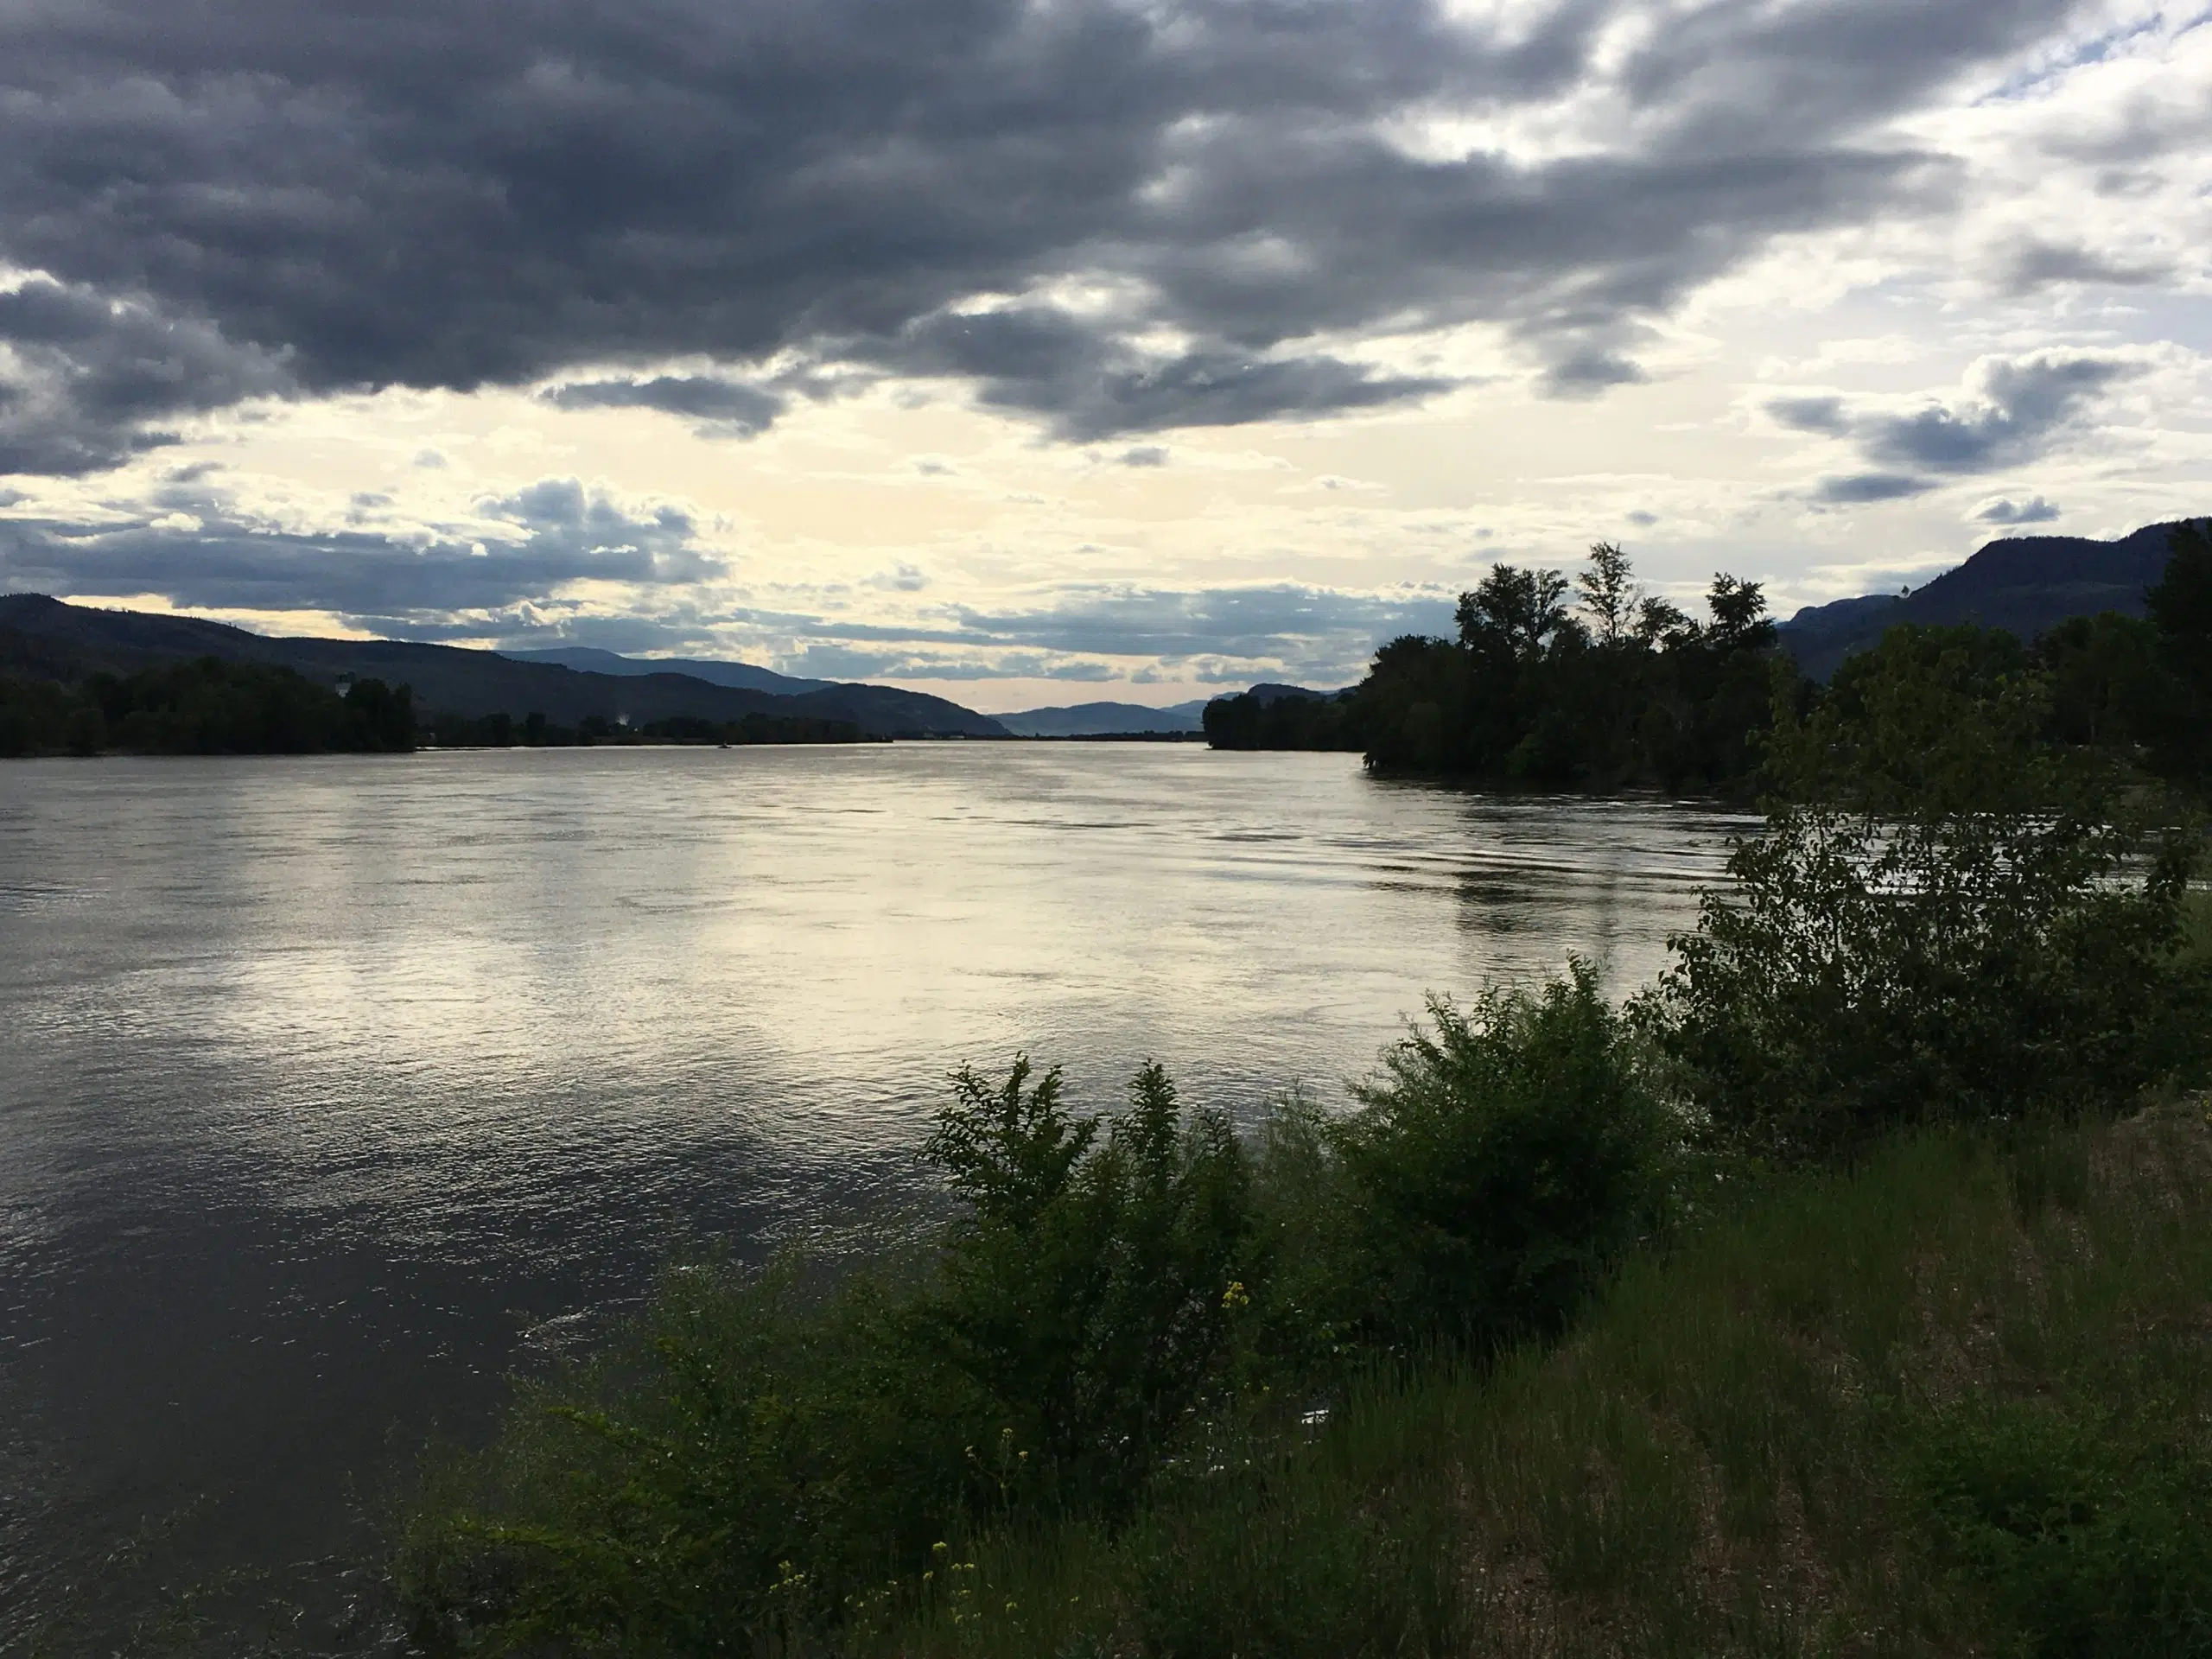 Flood watch issued for South Thompson River; high streamflow advisory maintained for North Thompson River